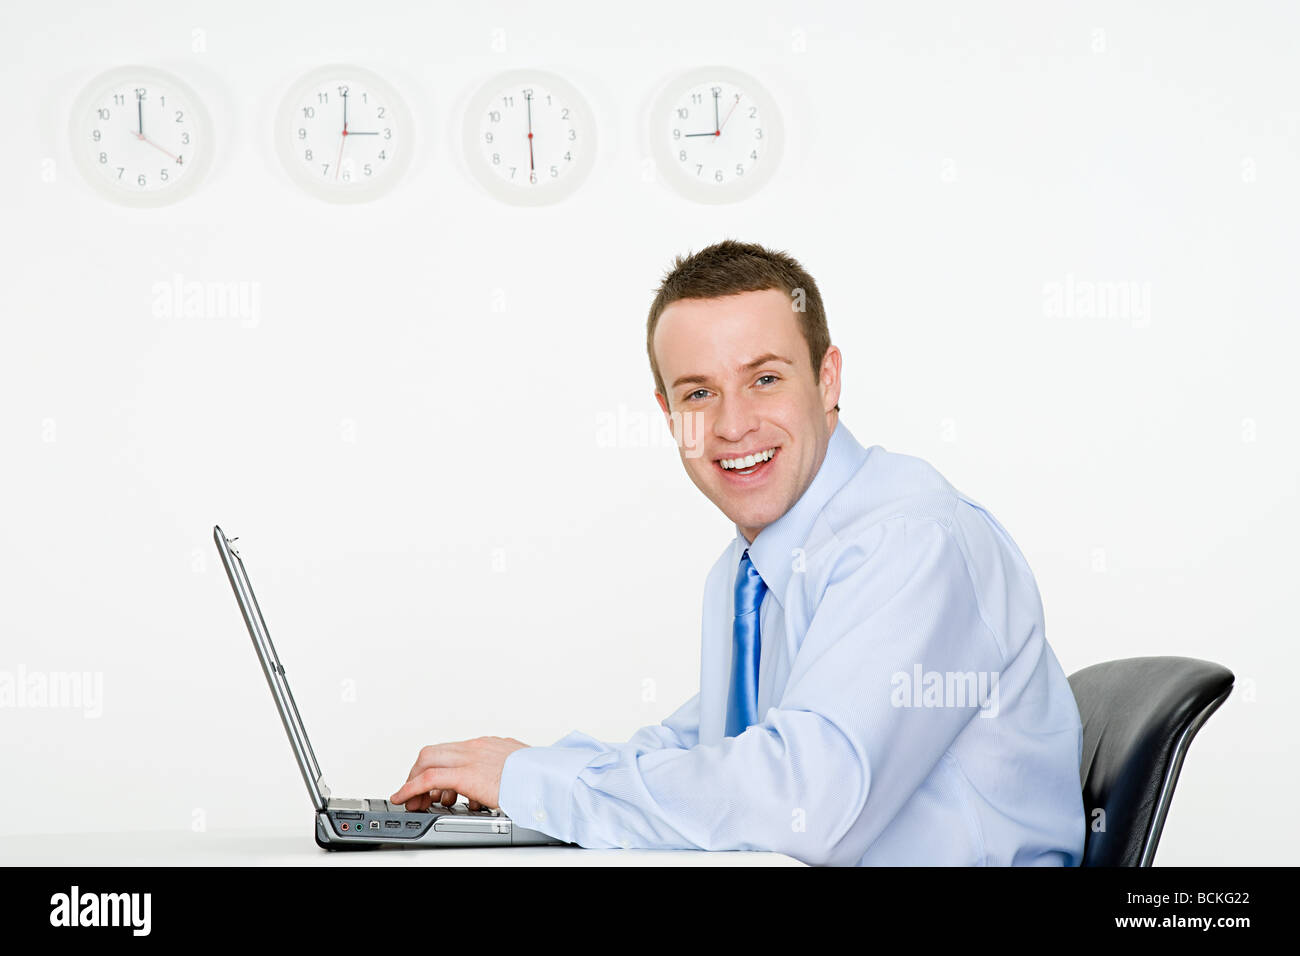 Office worker with laptop and wall clocks Stock Photo